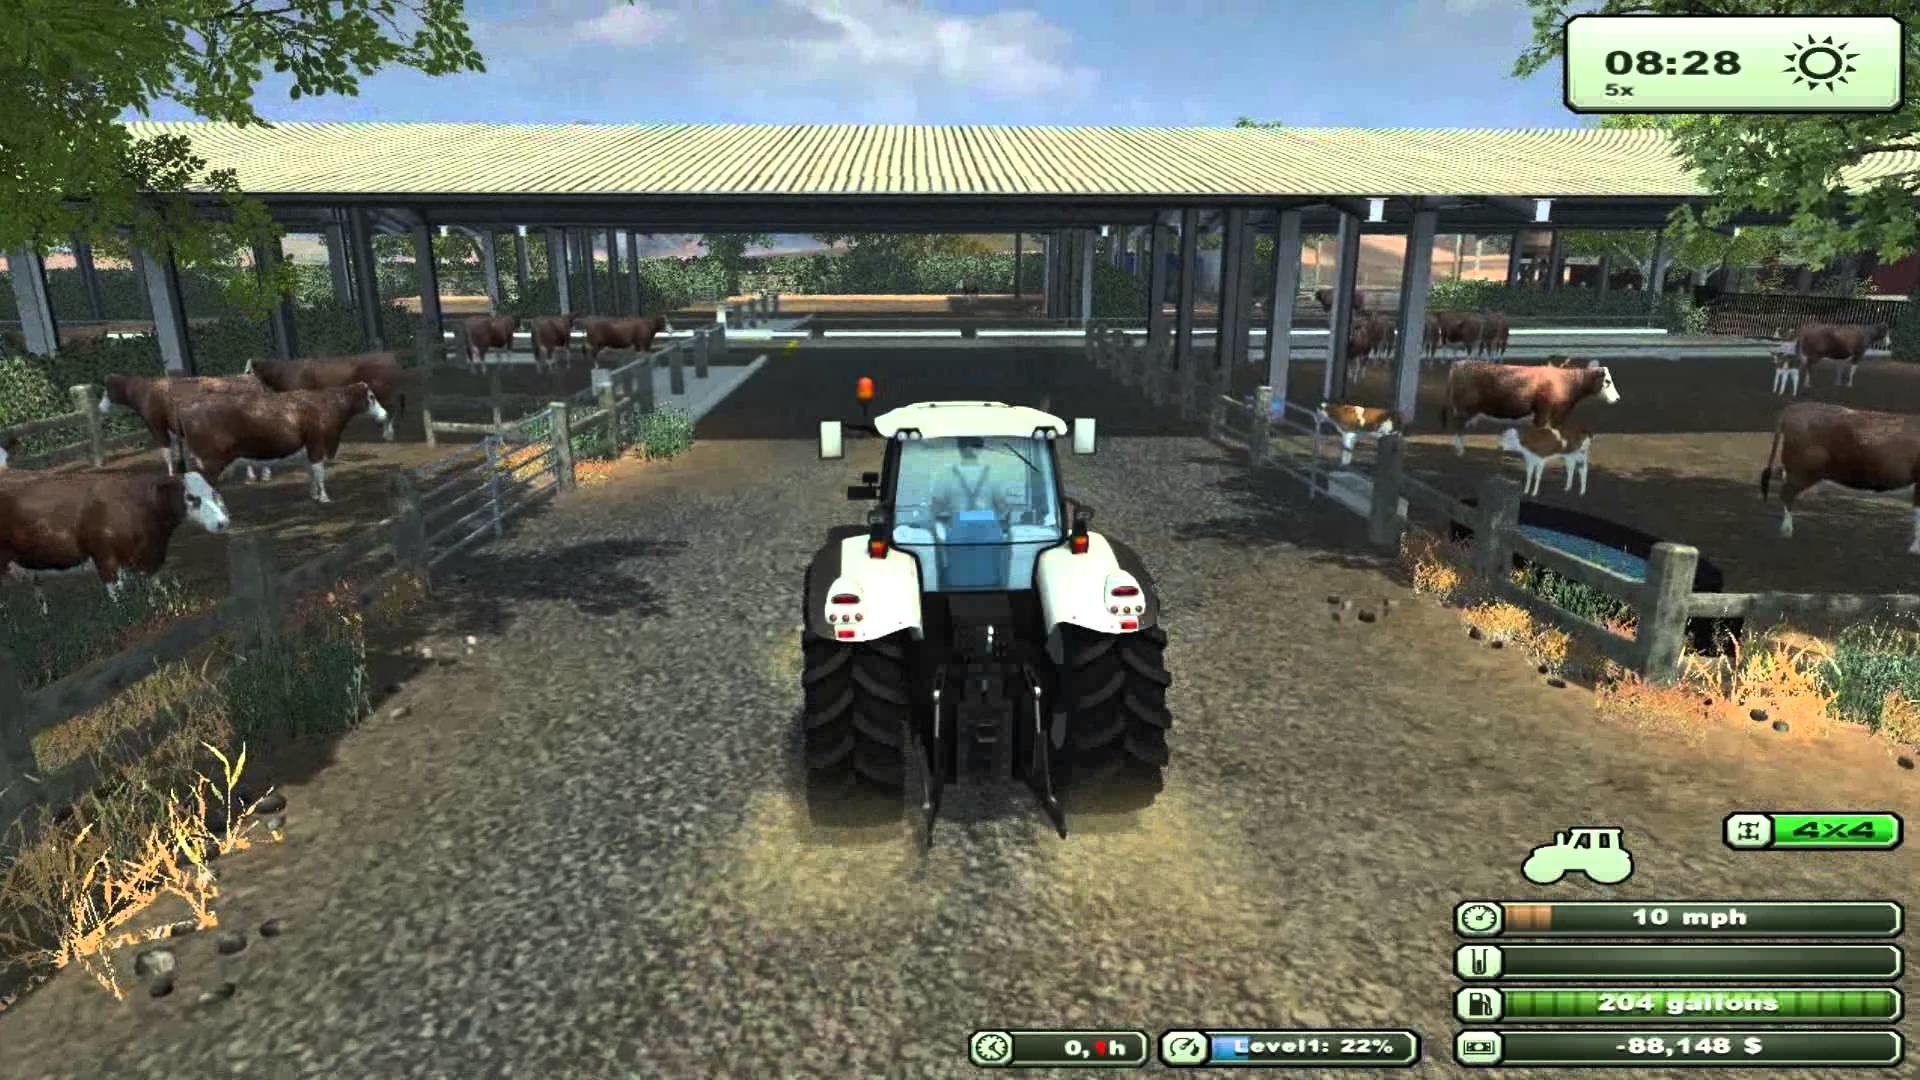 1920x1080 Farming Simulator 2013 - New Map "USA" a lot of great detail check it out!  - YouTube